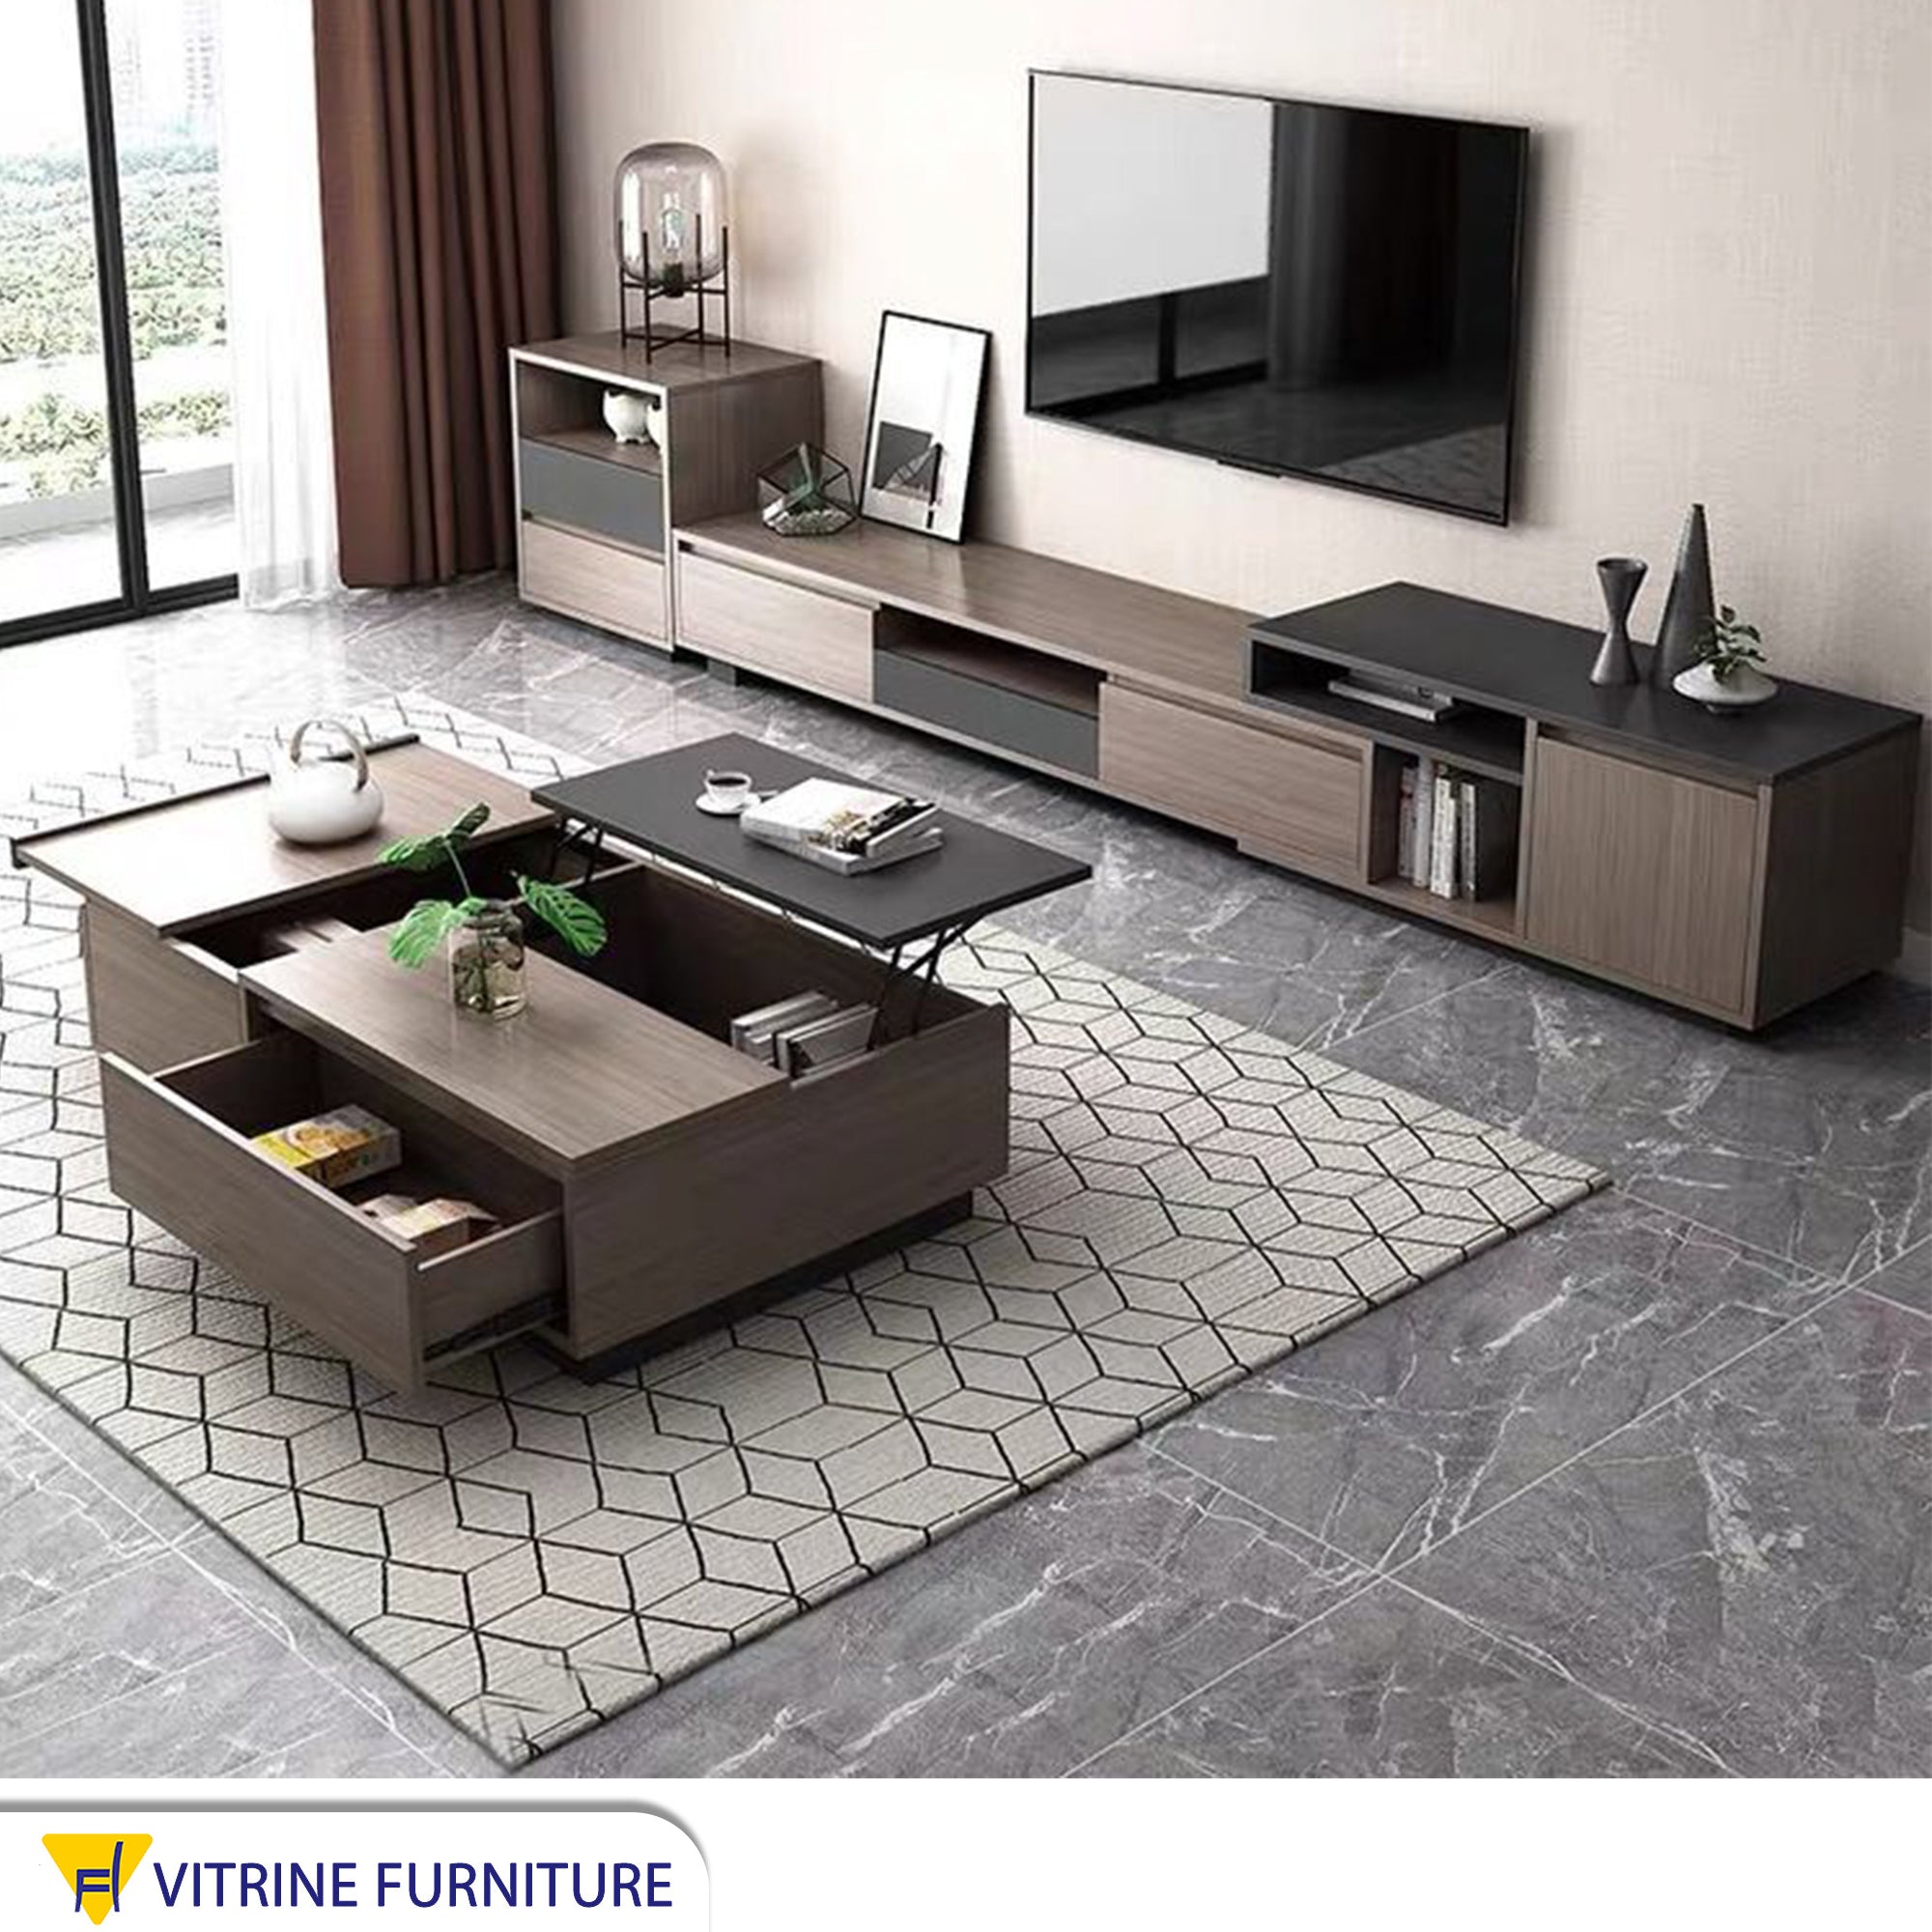 A TV unit, a shelf, and a unit with 2 drawers and a rectangular table